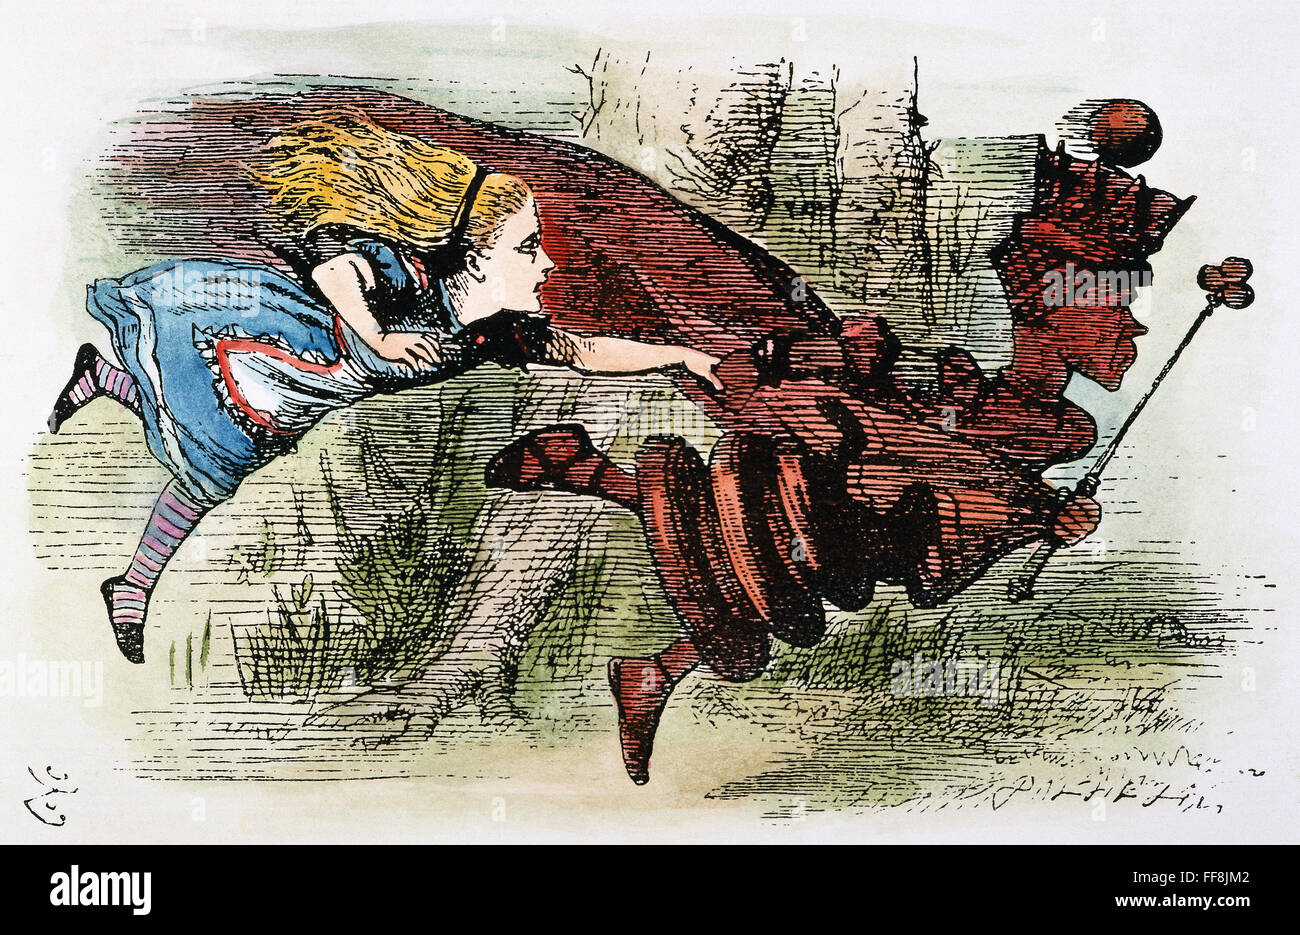 CARROLL: LOOKING GLASS. Alice and the Red Queen running but getting nowhere. Illustration by John Tenniel from the first edition of Lewis Carroll's 'Through the Looking Glass,' 1872. Stock Photo